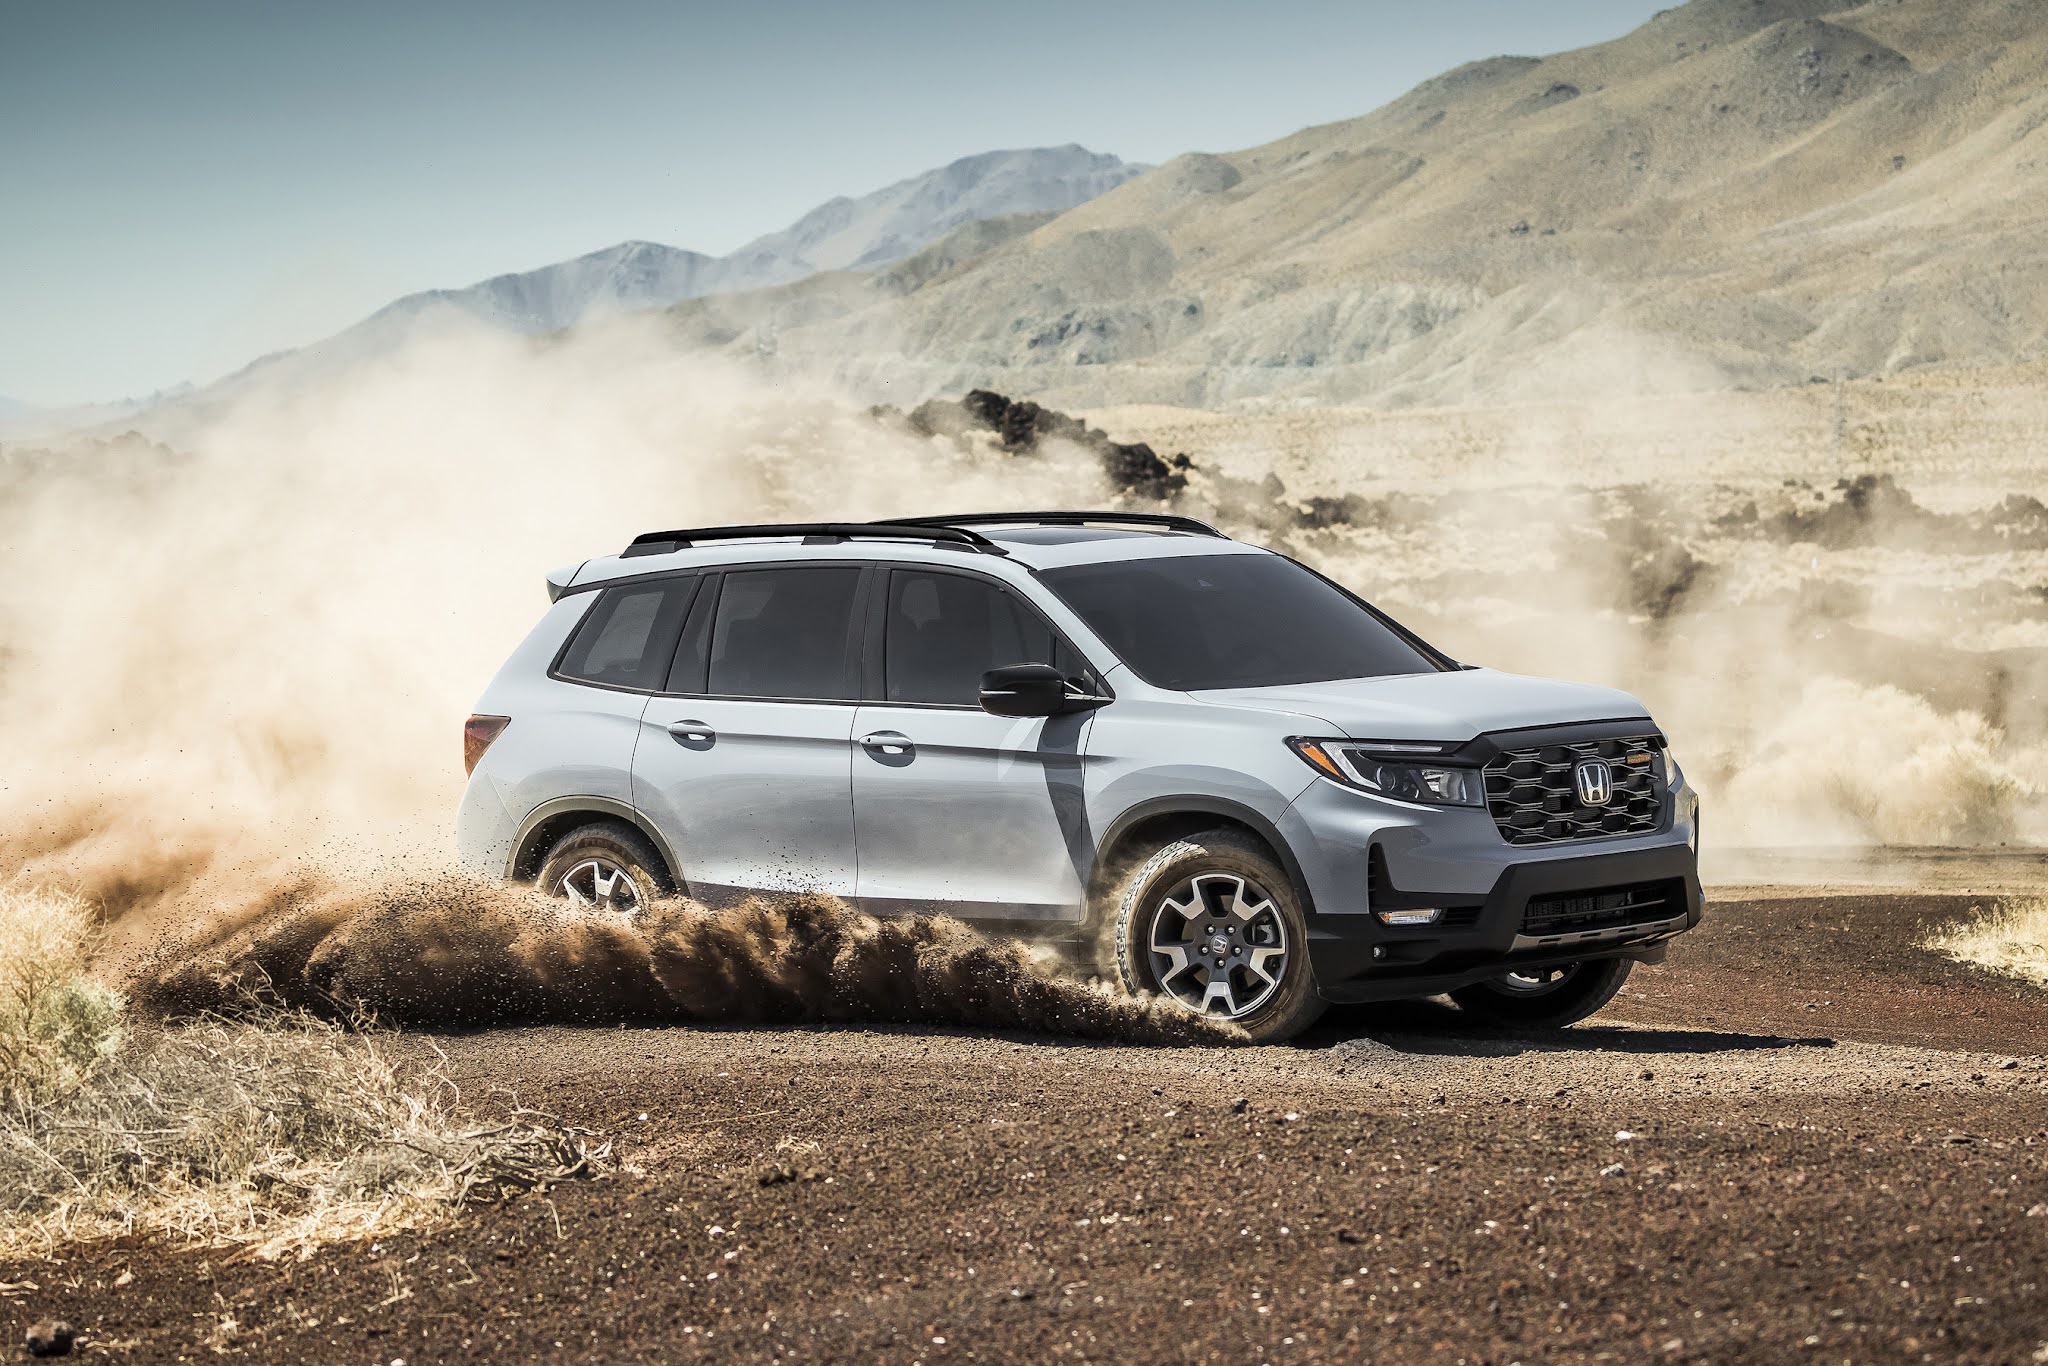 2022 Honda Passport Arriving with Rugged New Styling; New TrailSport Model Adds Emotion and Adventure